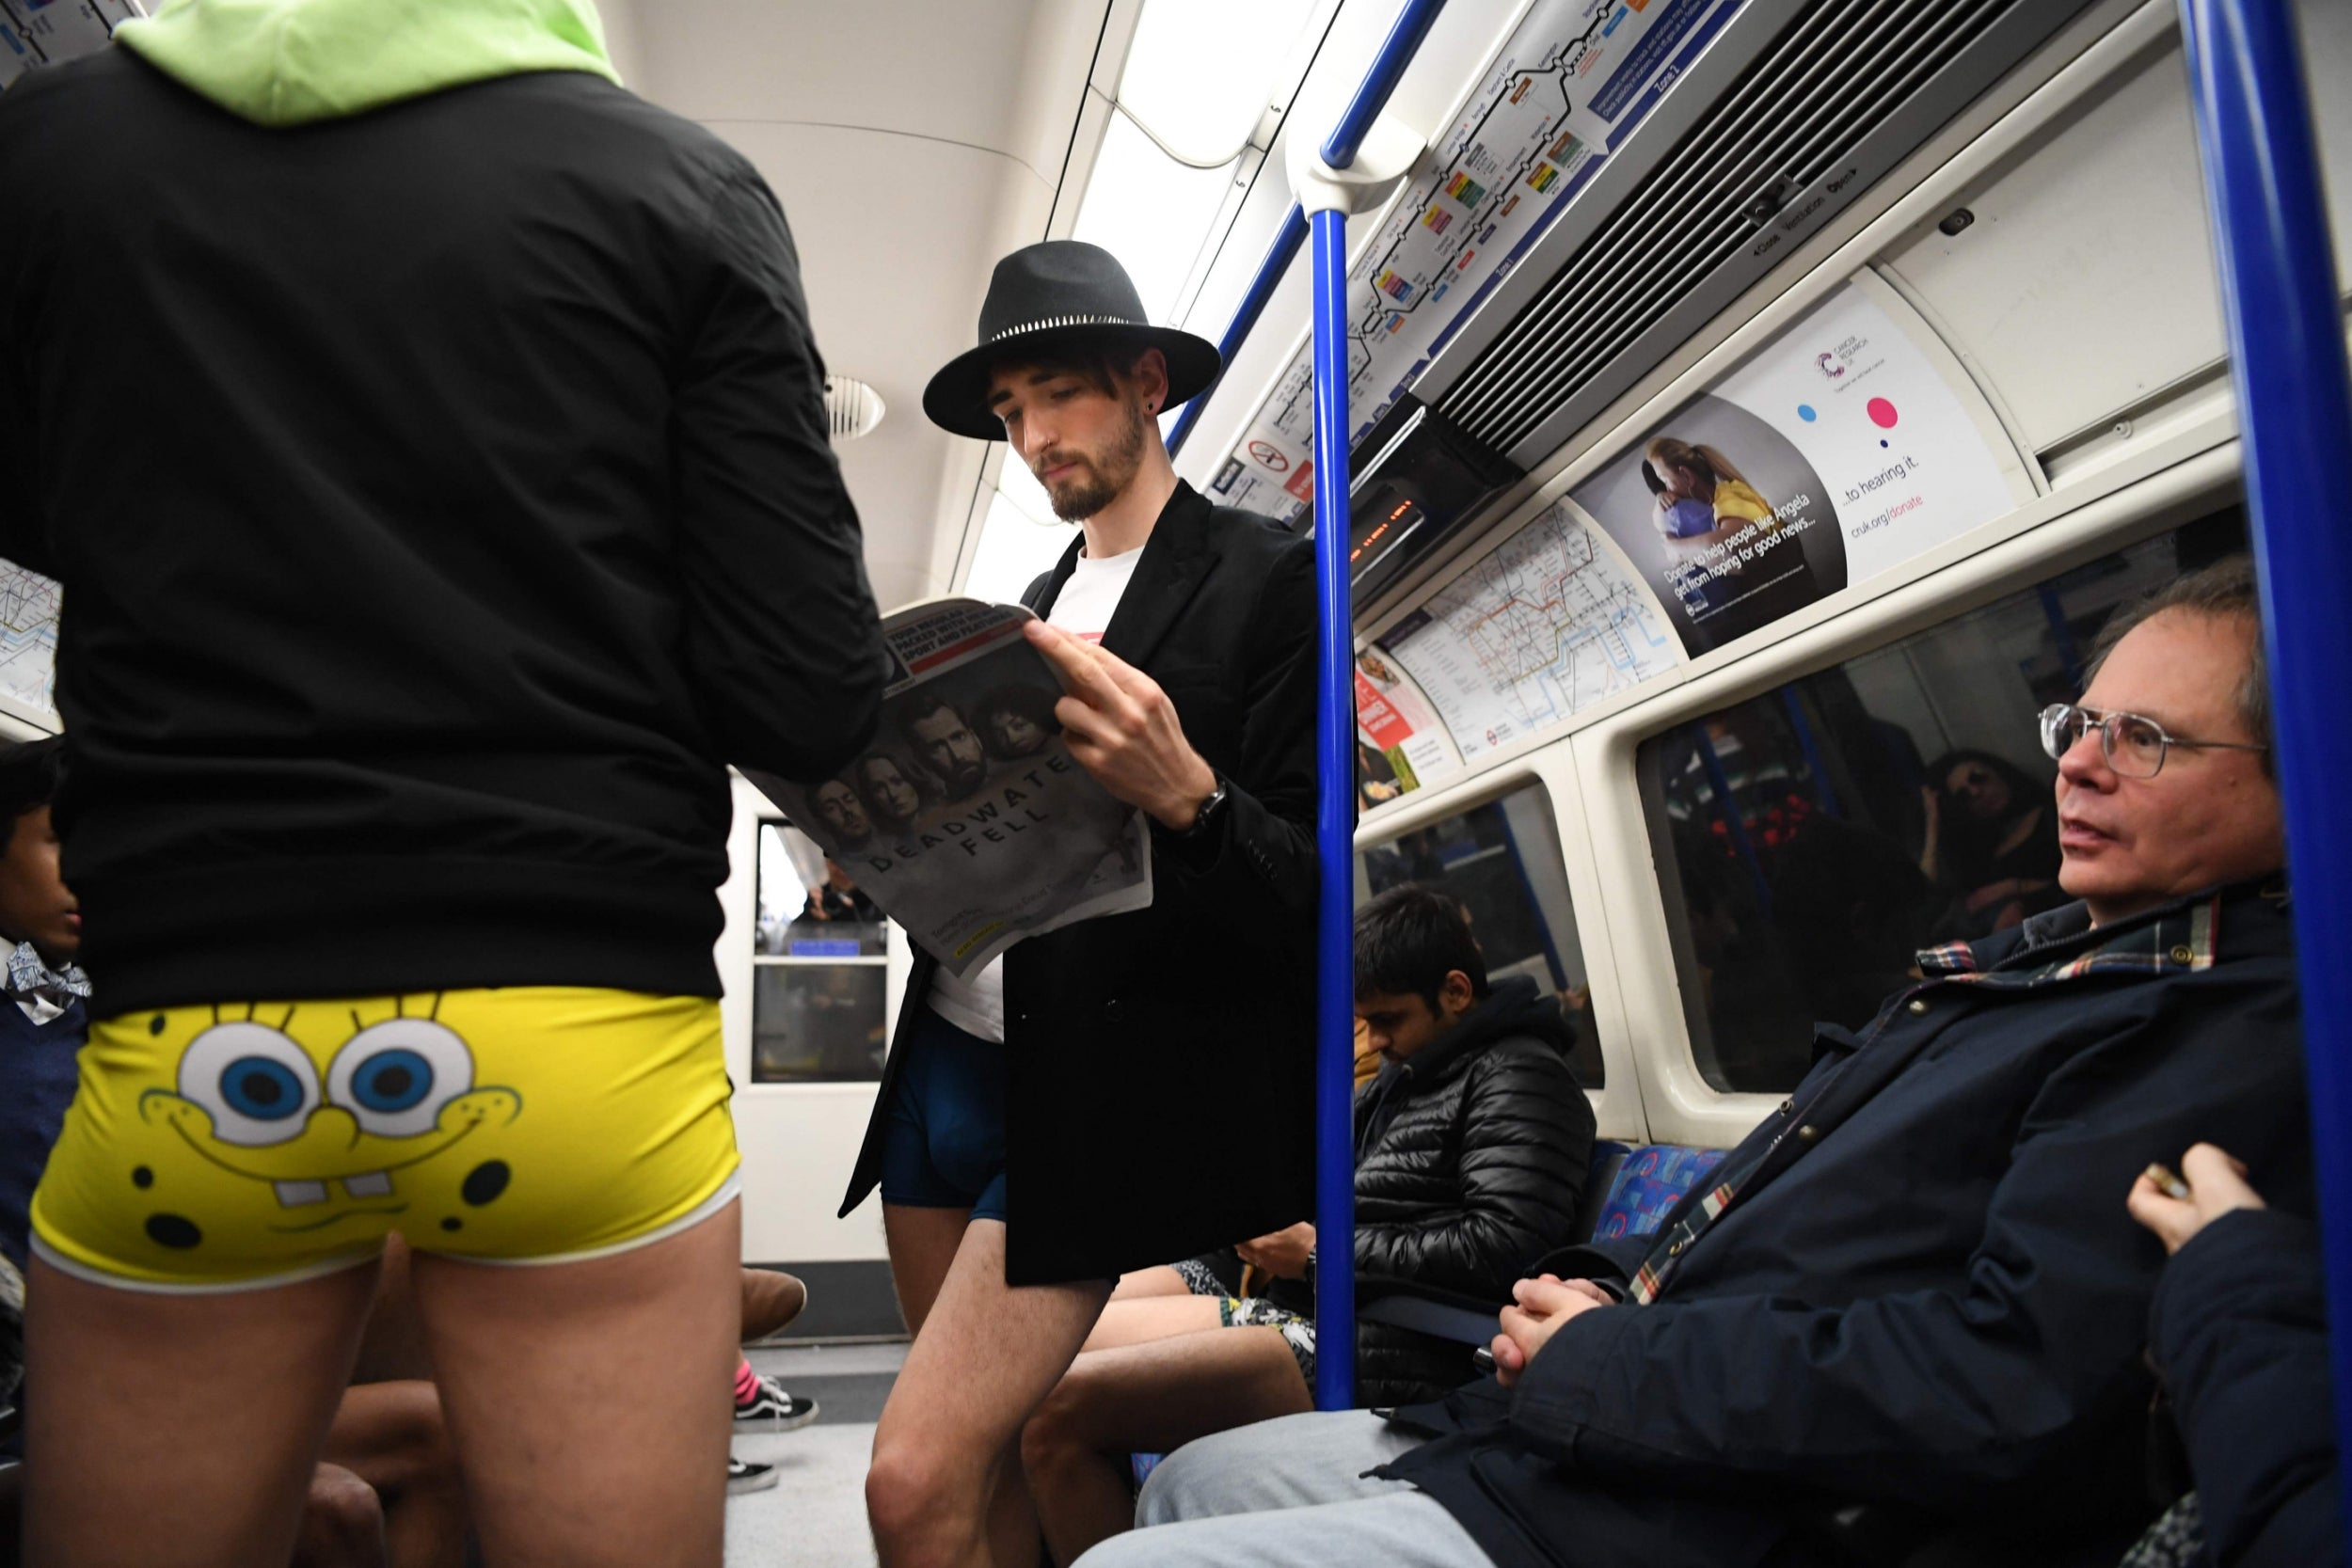 No Trousers Tube Ride Passengers strip down to underwear on public transport in celebration of silliness The Independent The Independent